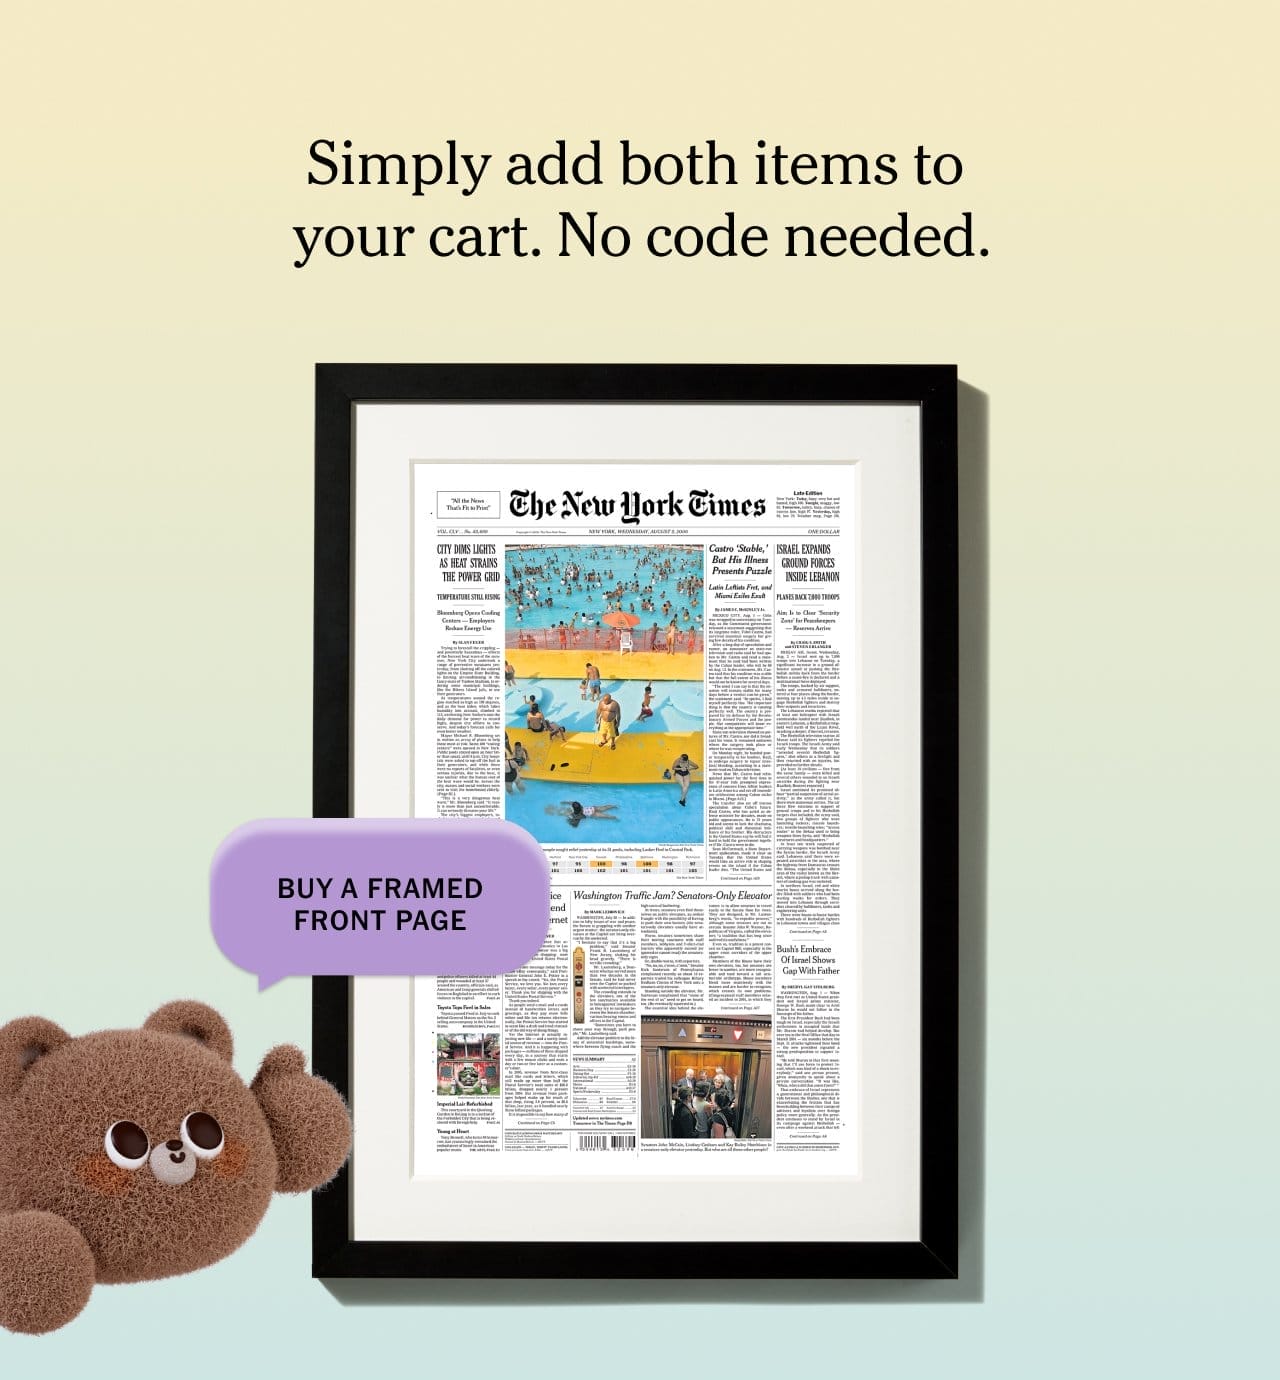  Simply add both items to your cart. No code needed. 